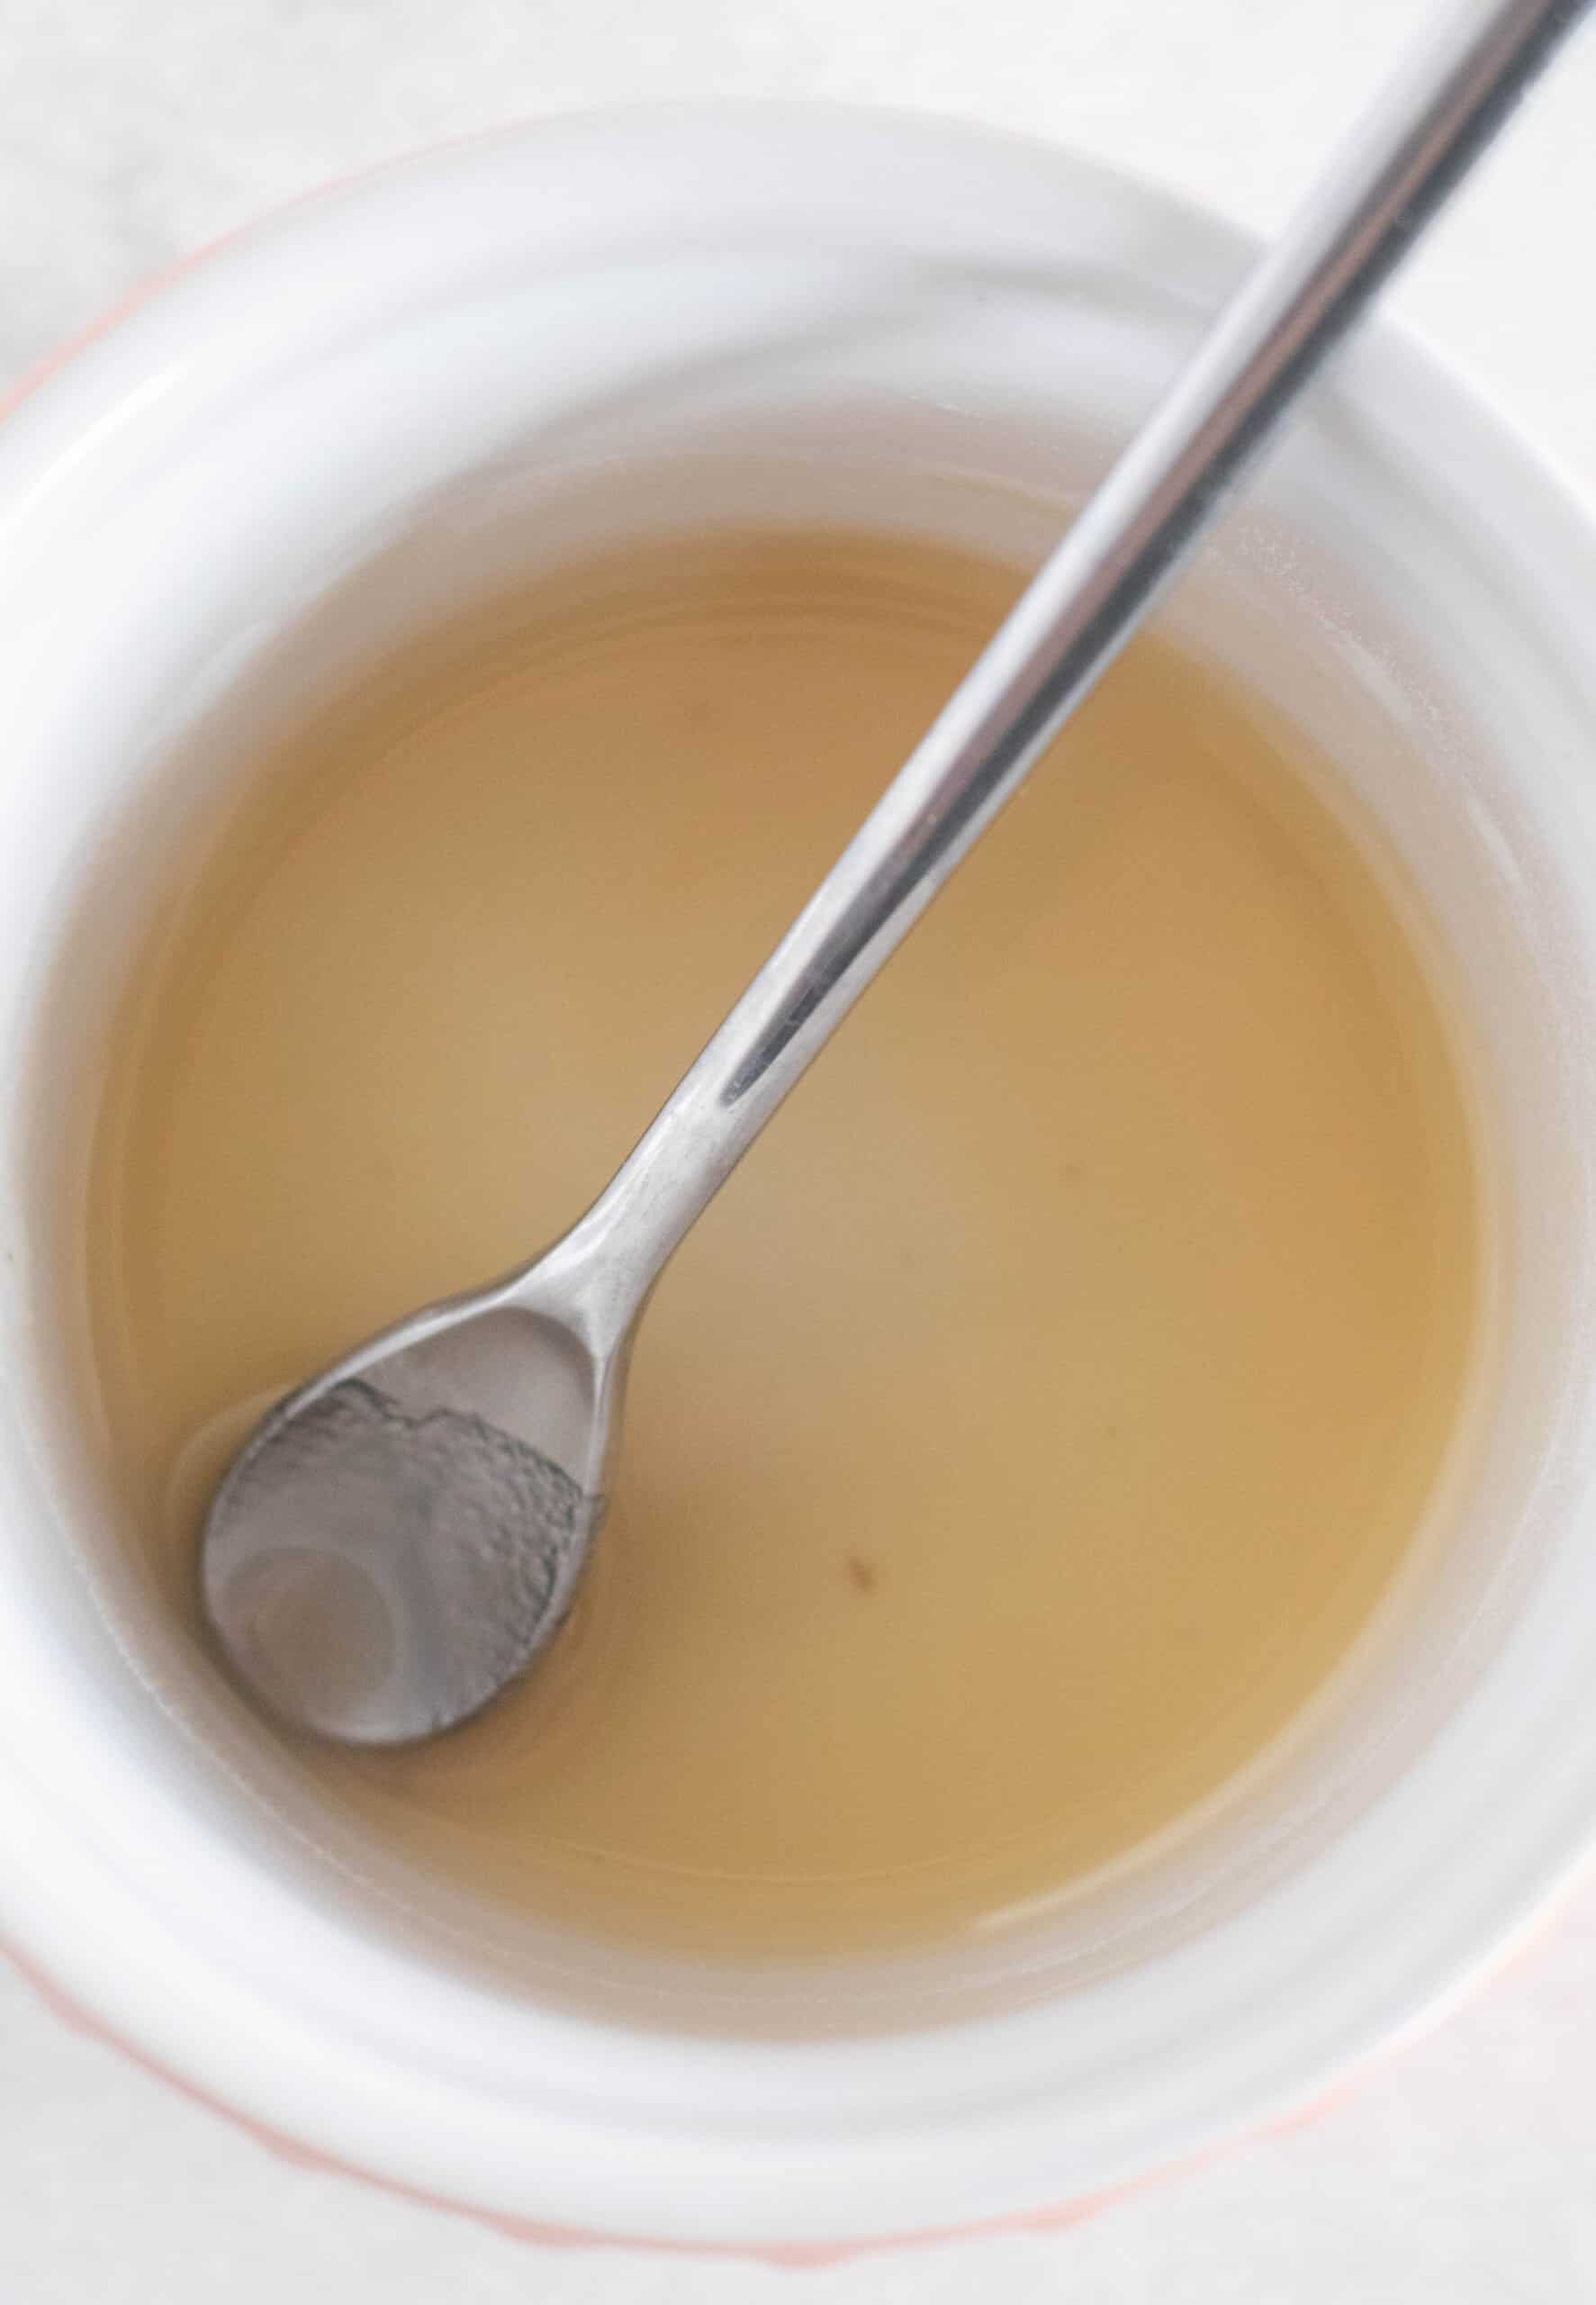 xanthan gum and oil mixed in a small bowl